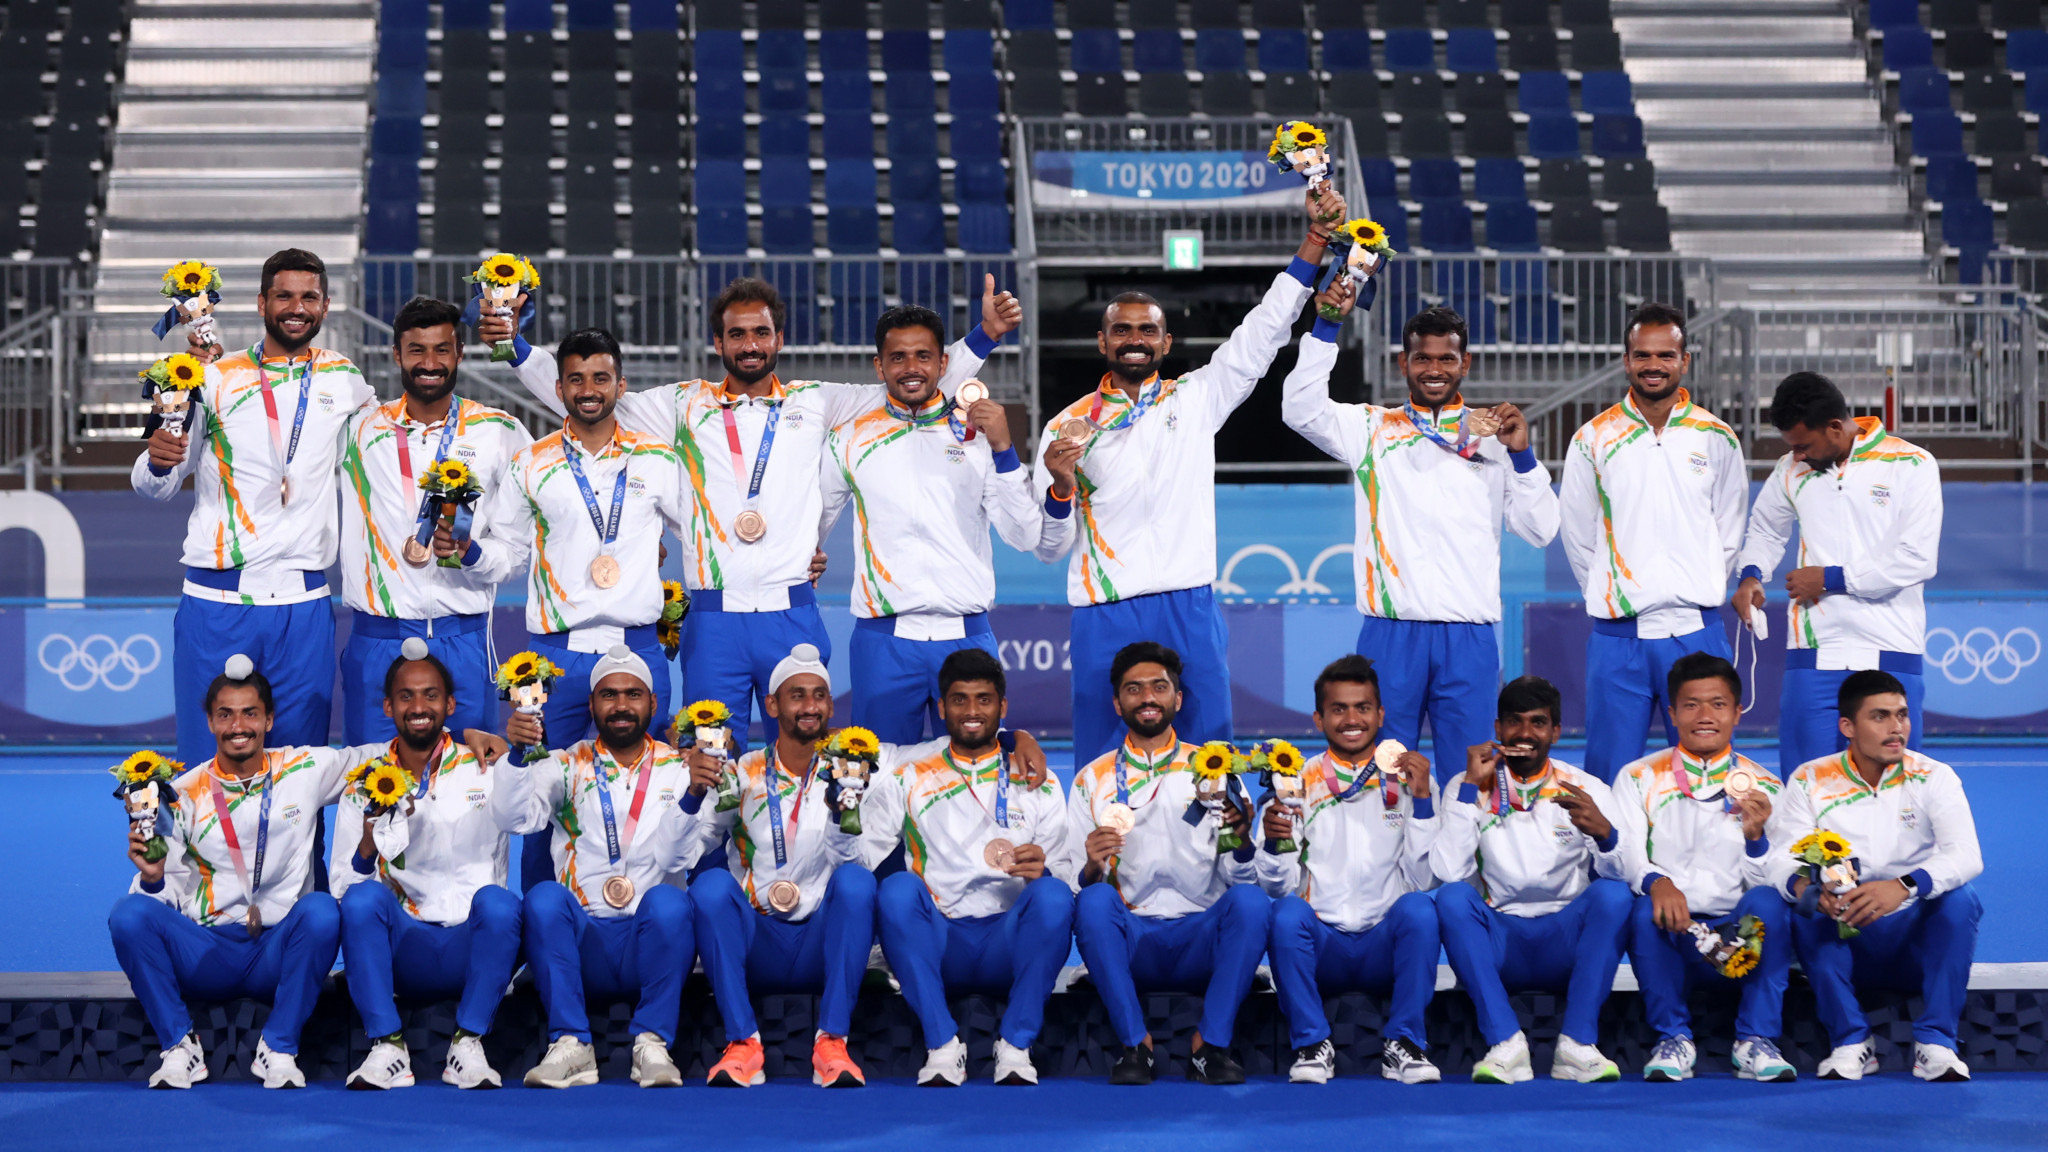 Exclusive: Indian hockey teams confirm to CGF President they will compete at Birmingham 2022